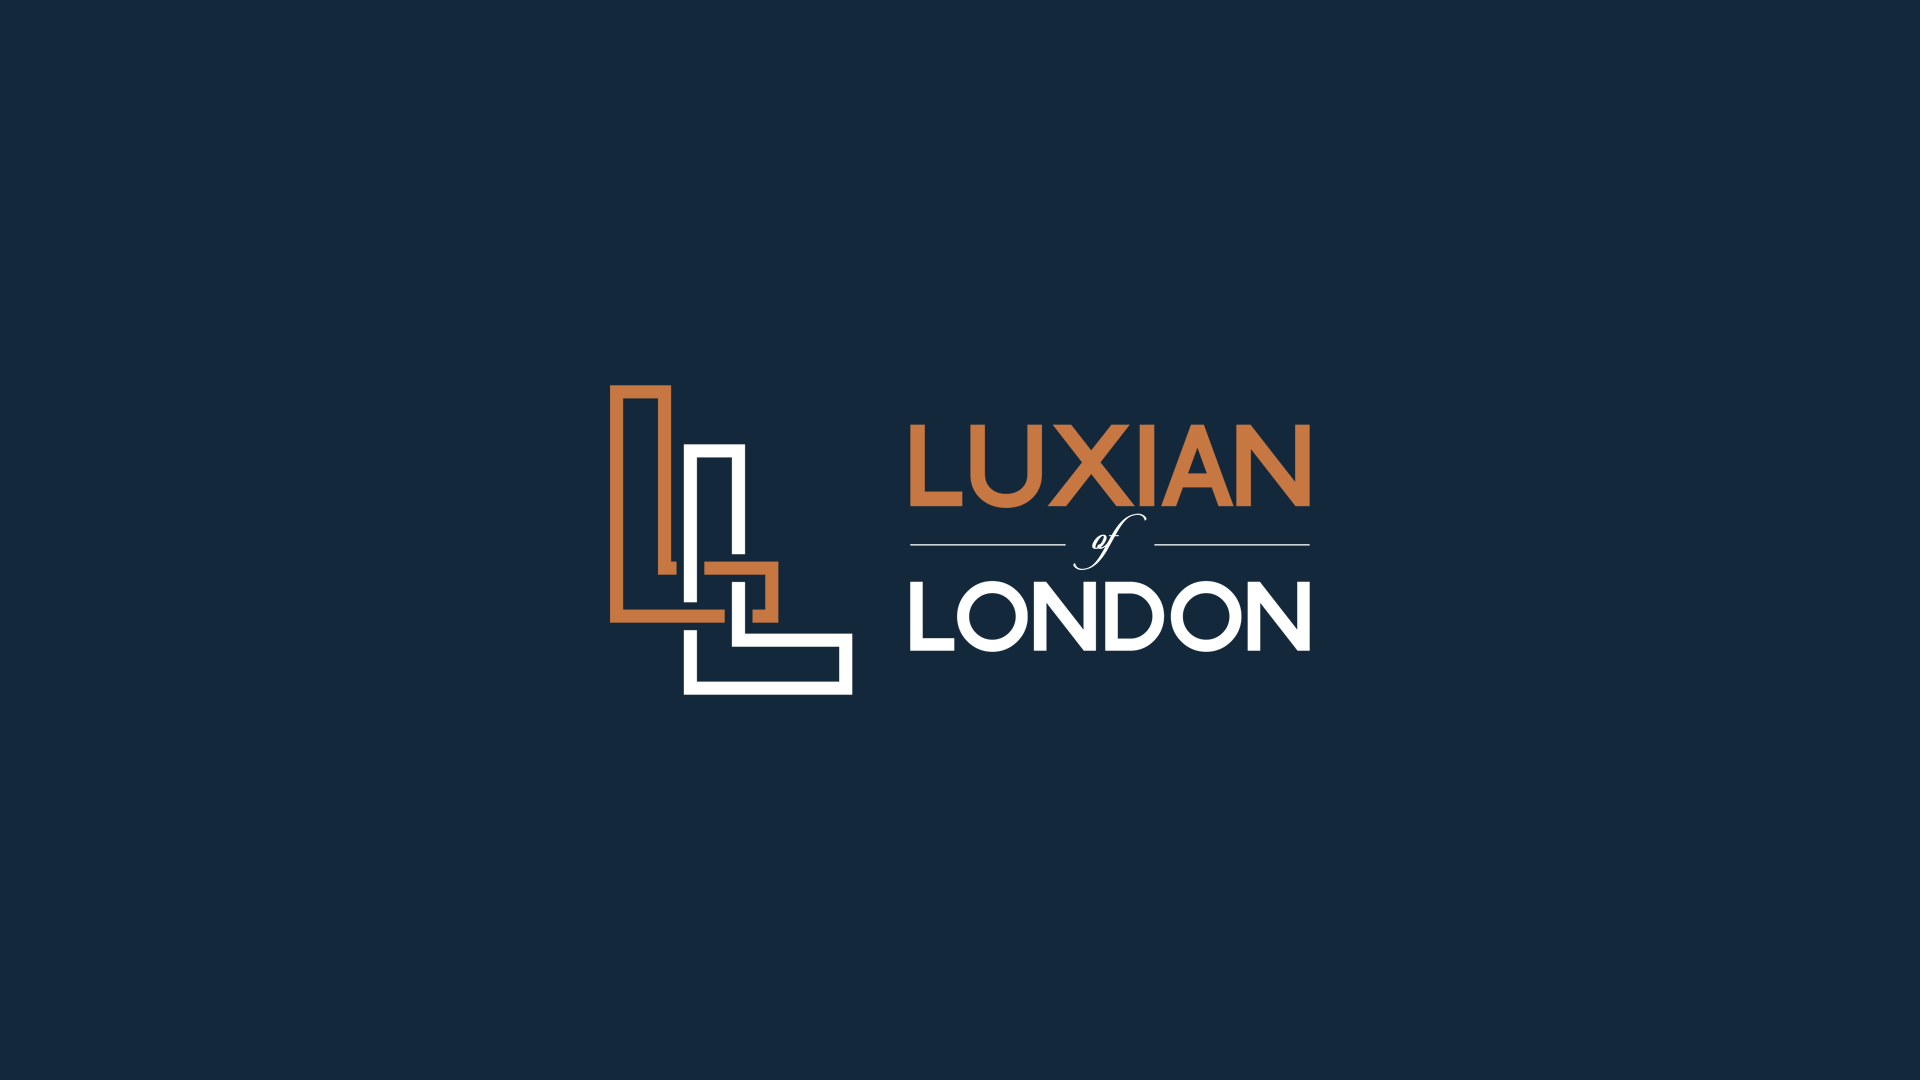 Logo of Luxian of London Chauffeur Driven Cars In London